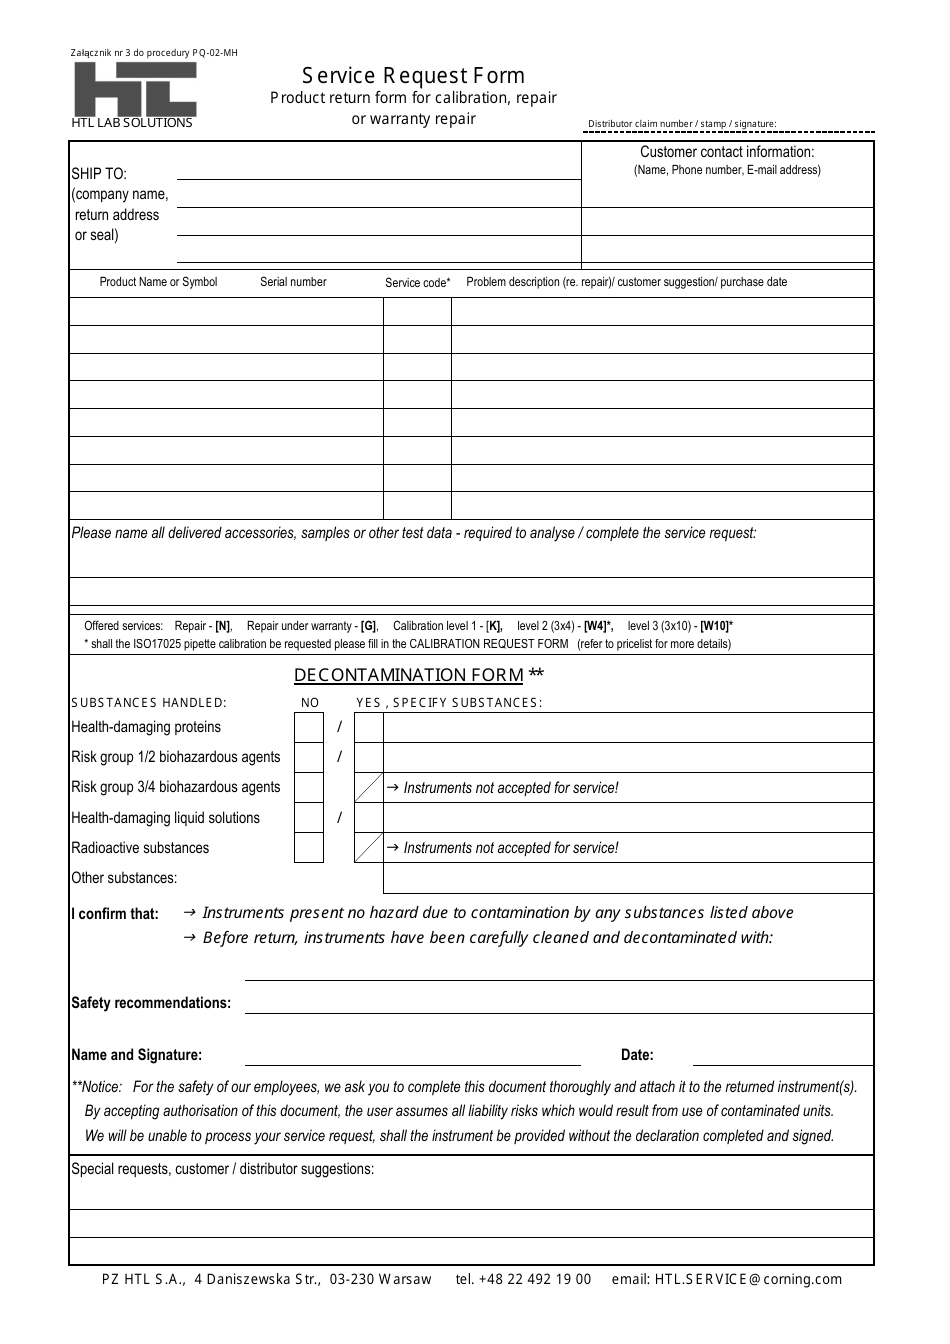 Service Request Form - Hit Lab Solutions, Page 1